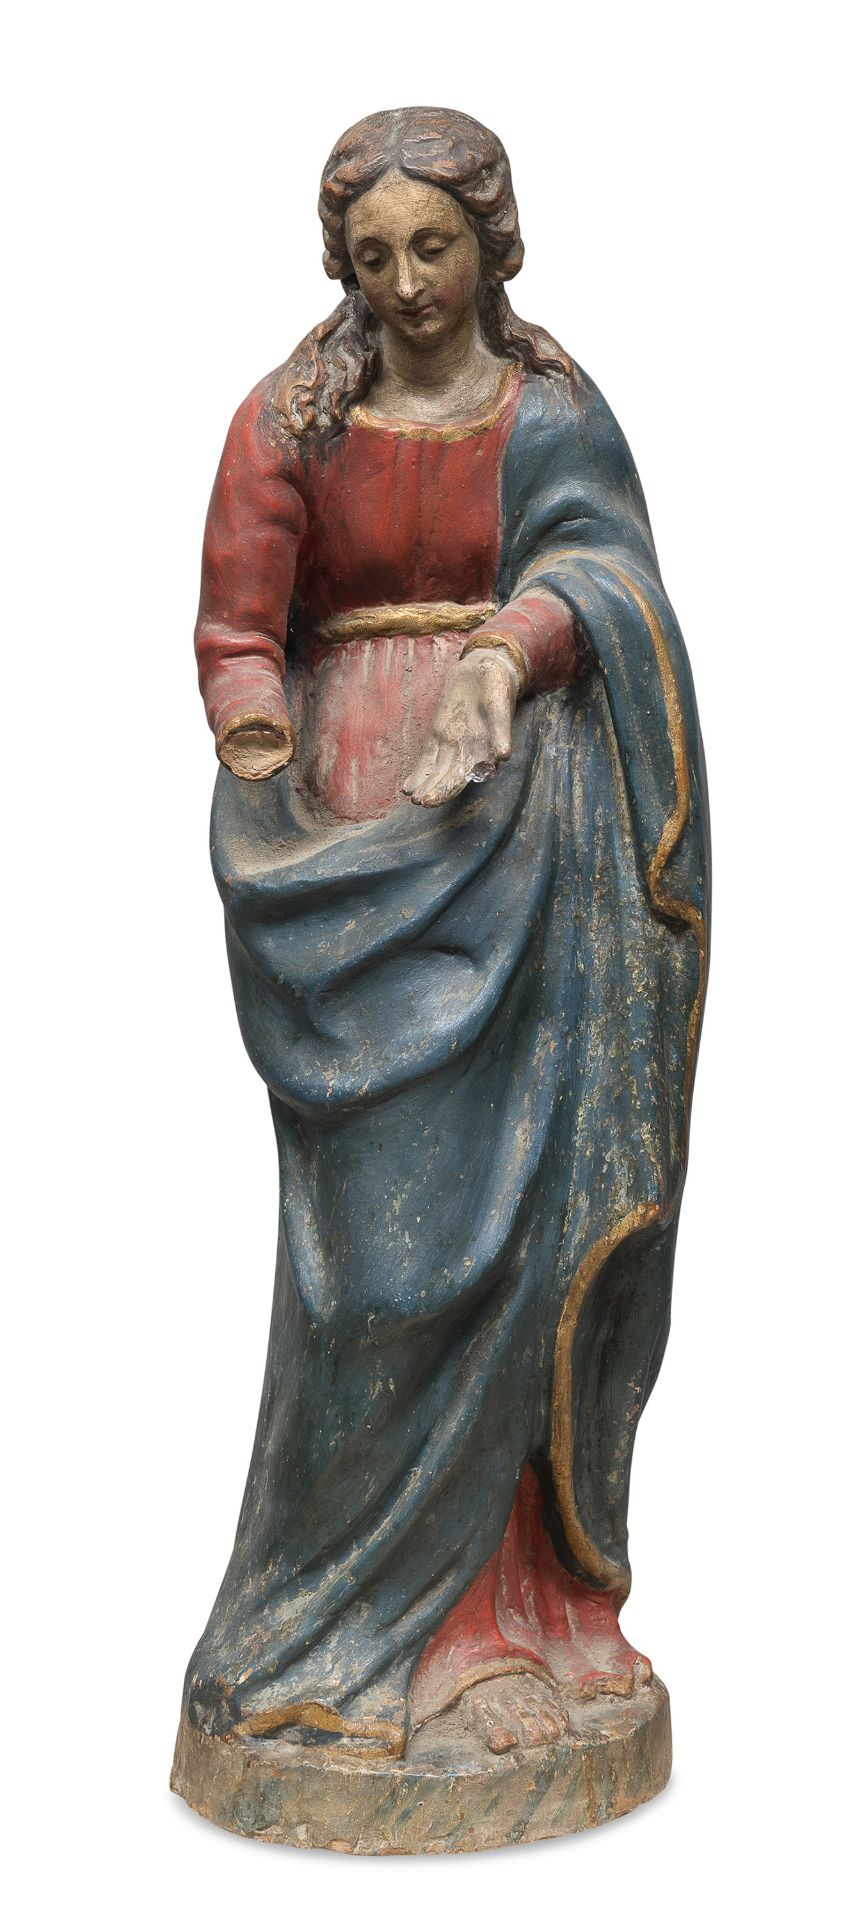 TERRACOTTA SCULPTURE OF THE VIRGIN CENTRAL ITALY 16TH CENTURY